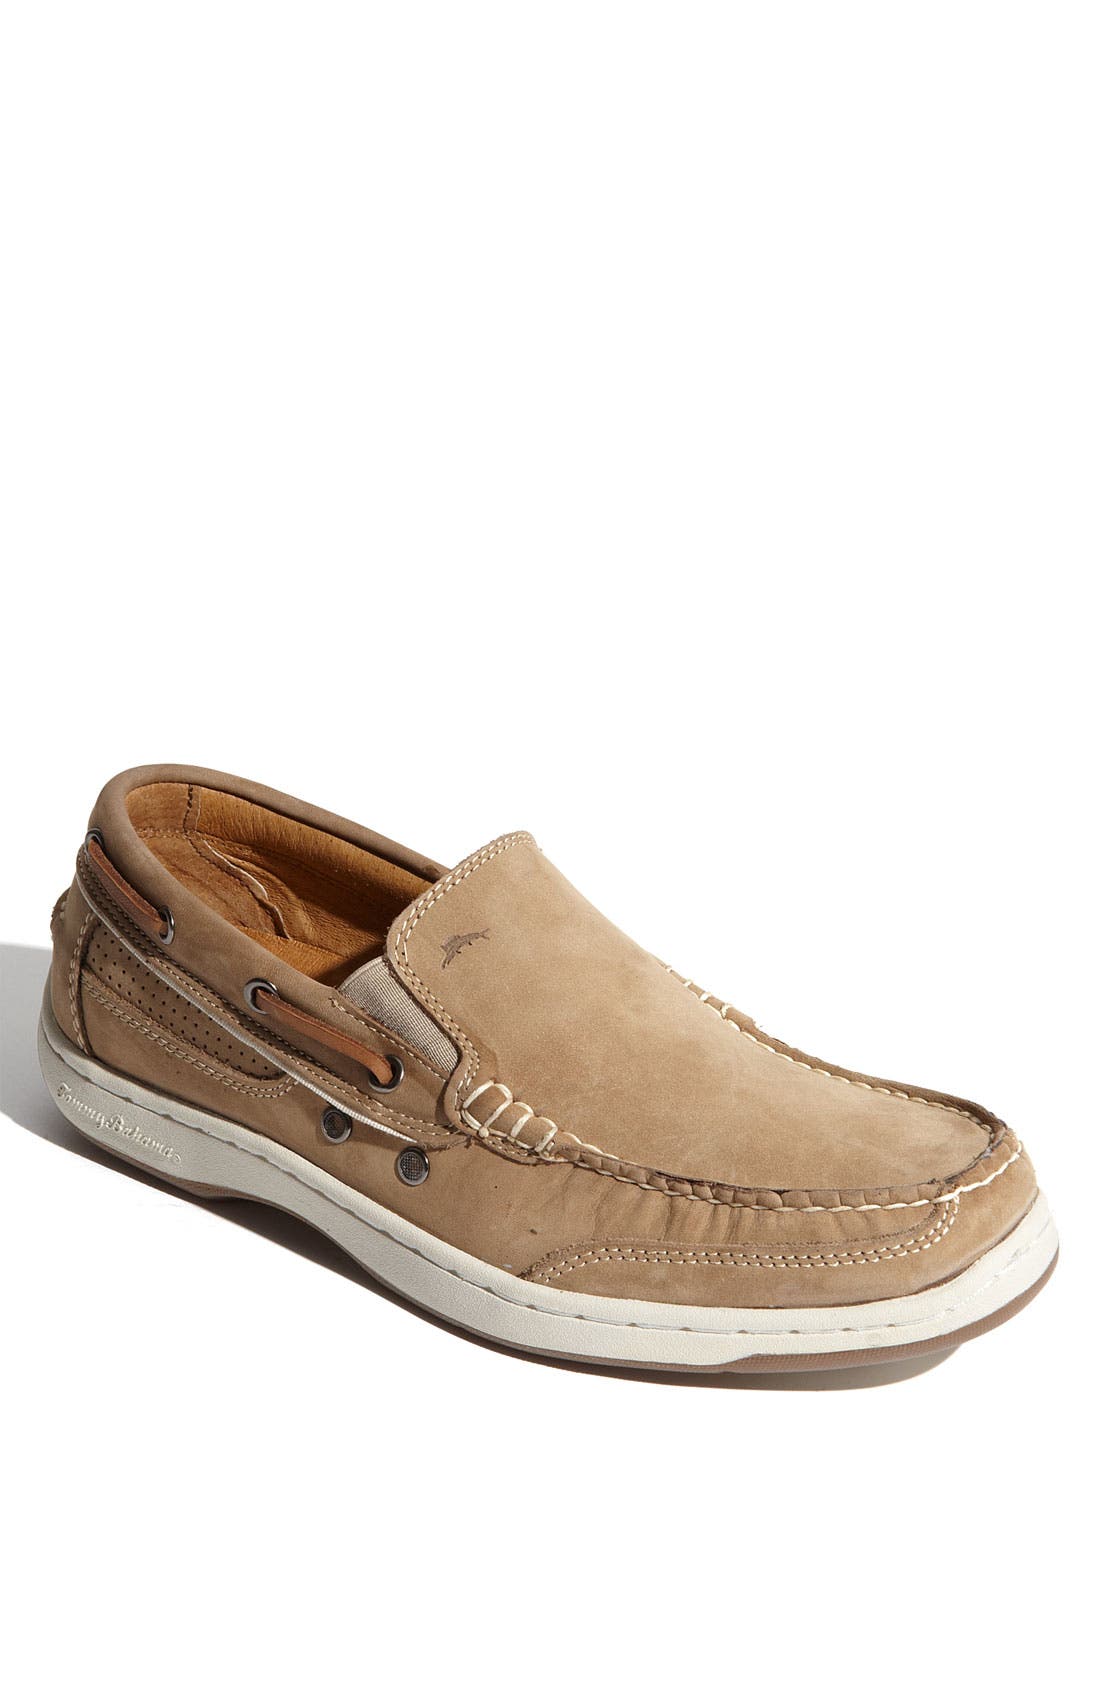 tommy bahama deck shoes